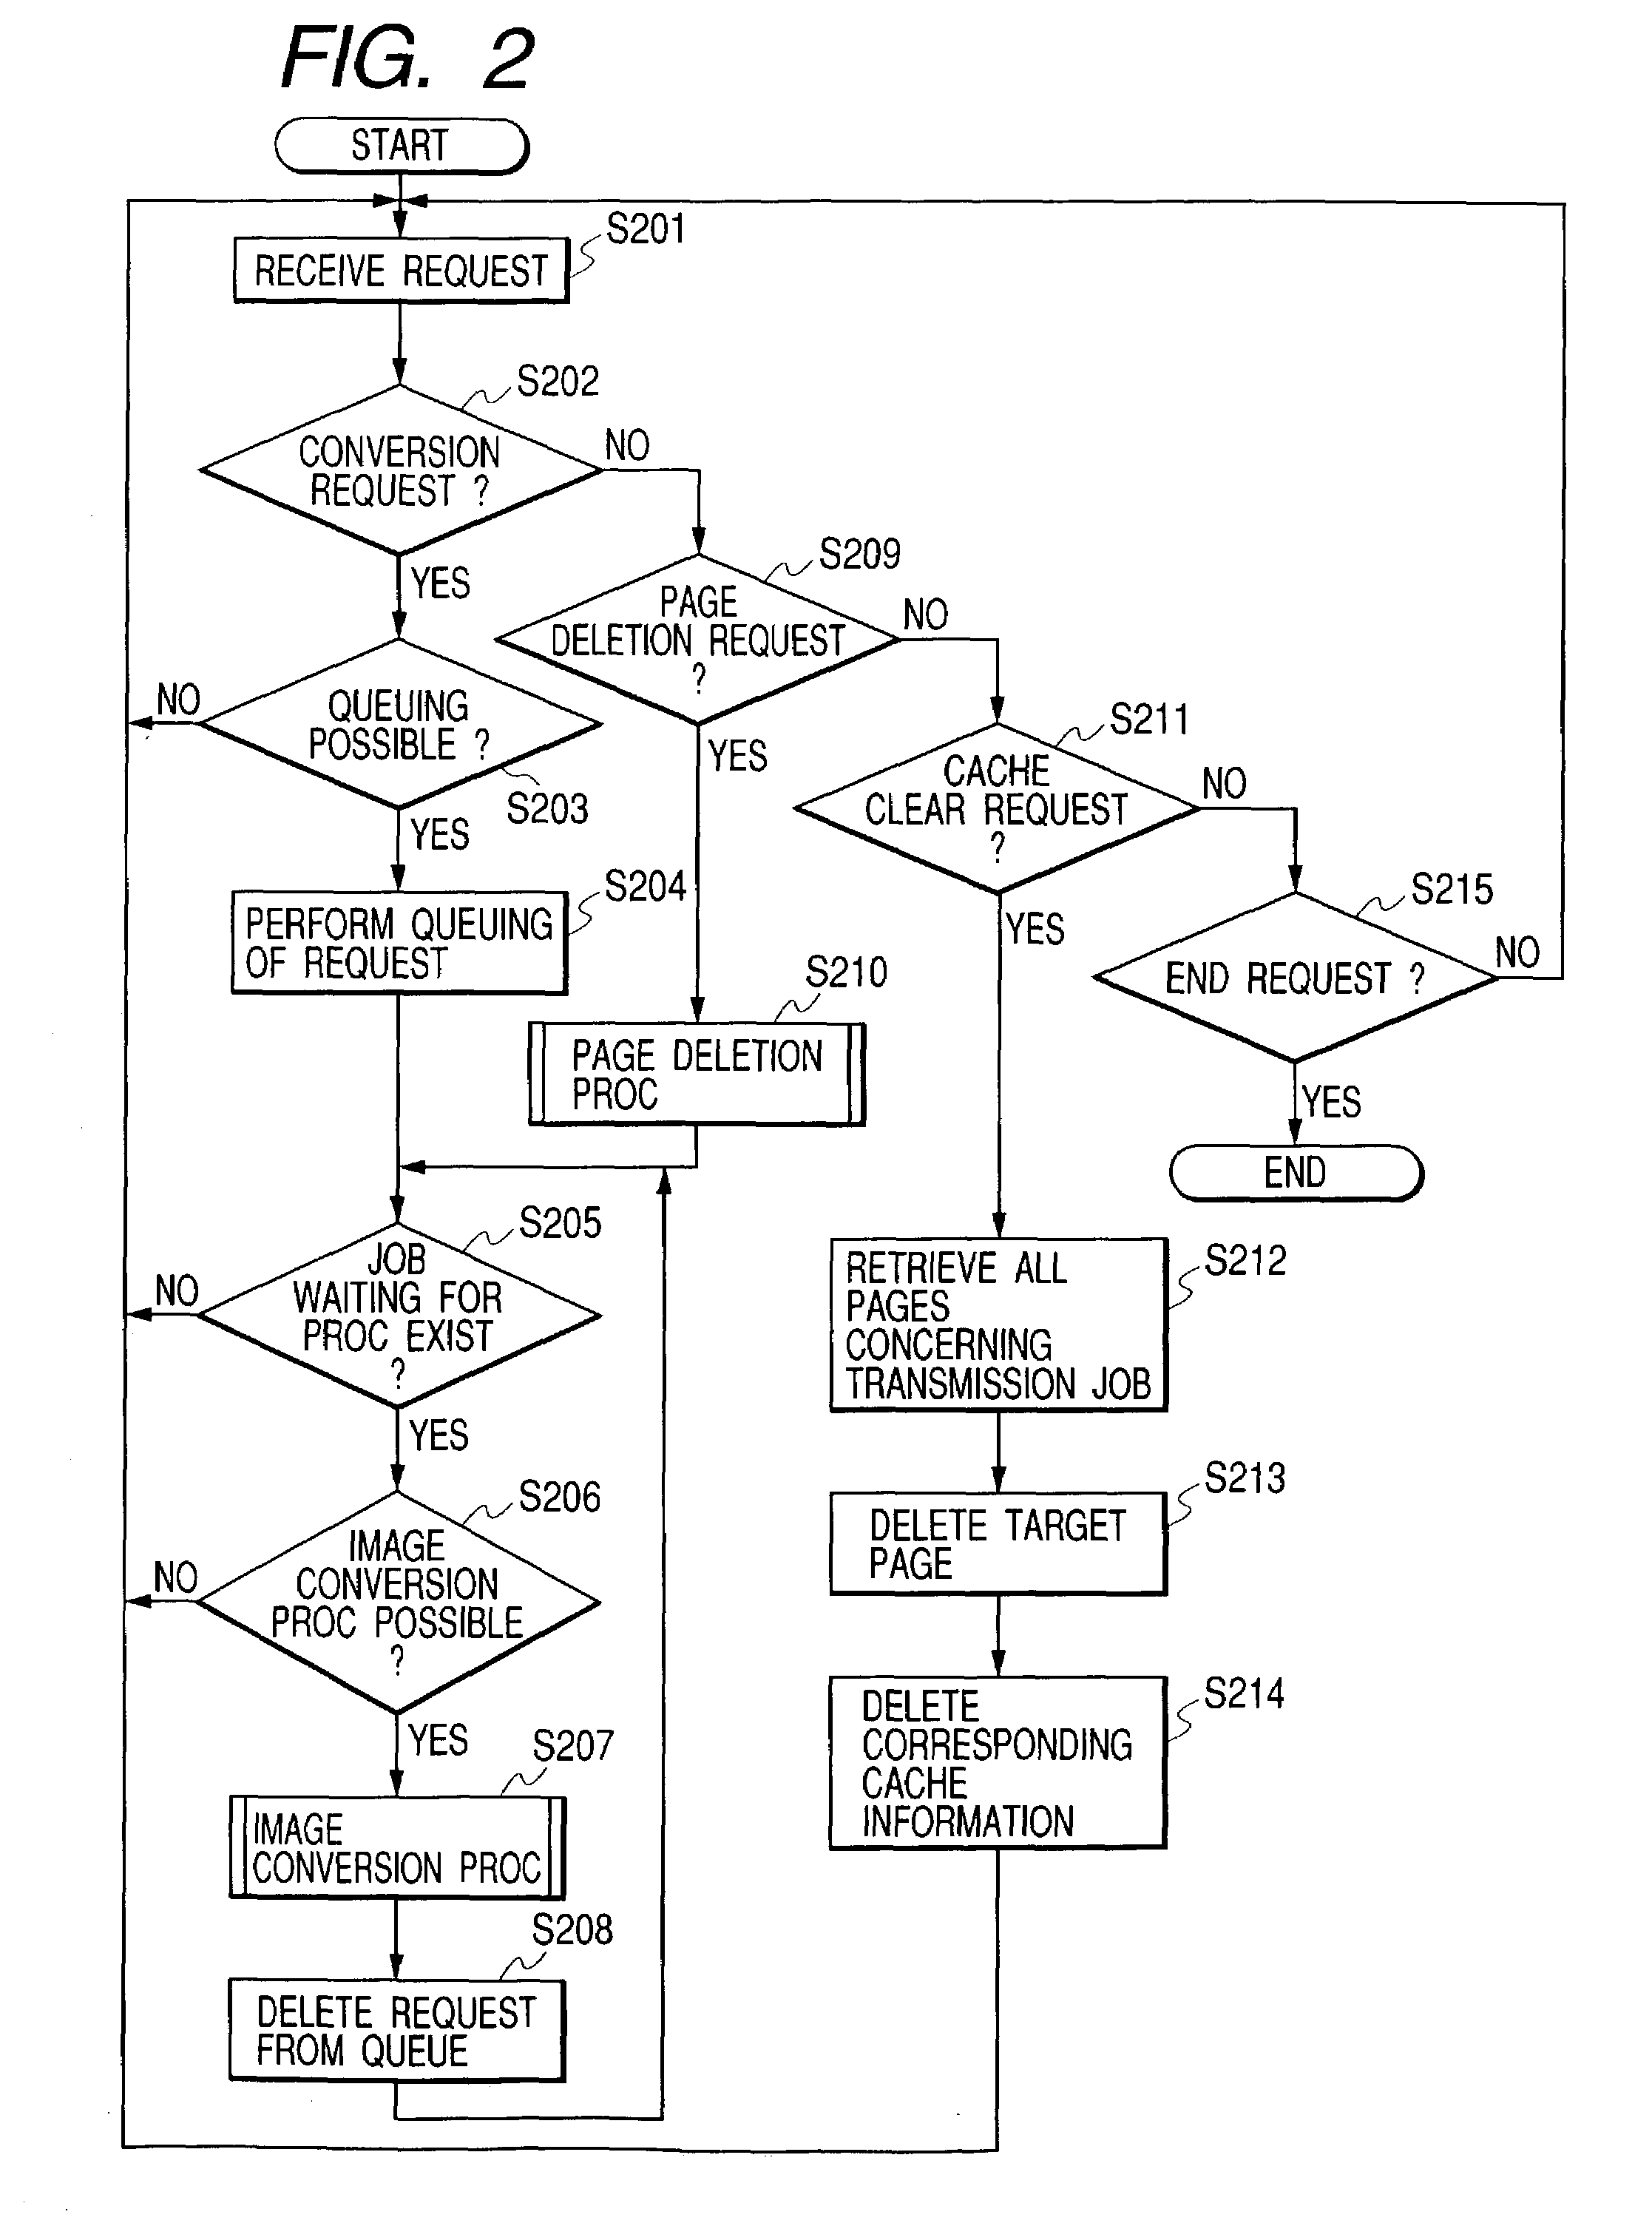 Image communication and processing with common performance of processing of a file preparatory to further processing by different applications